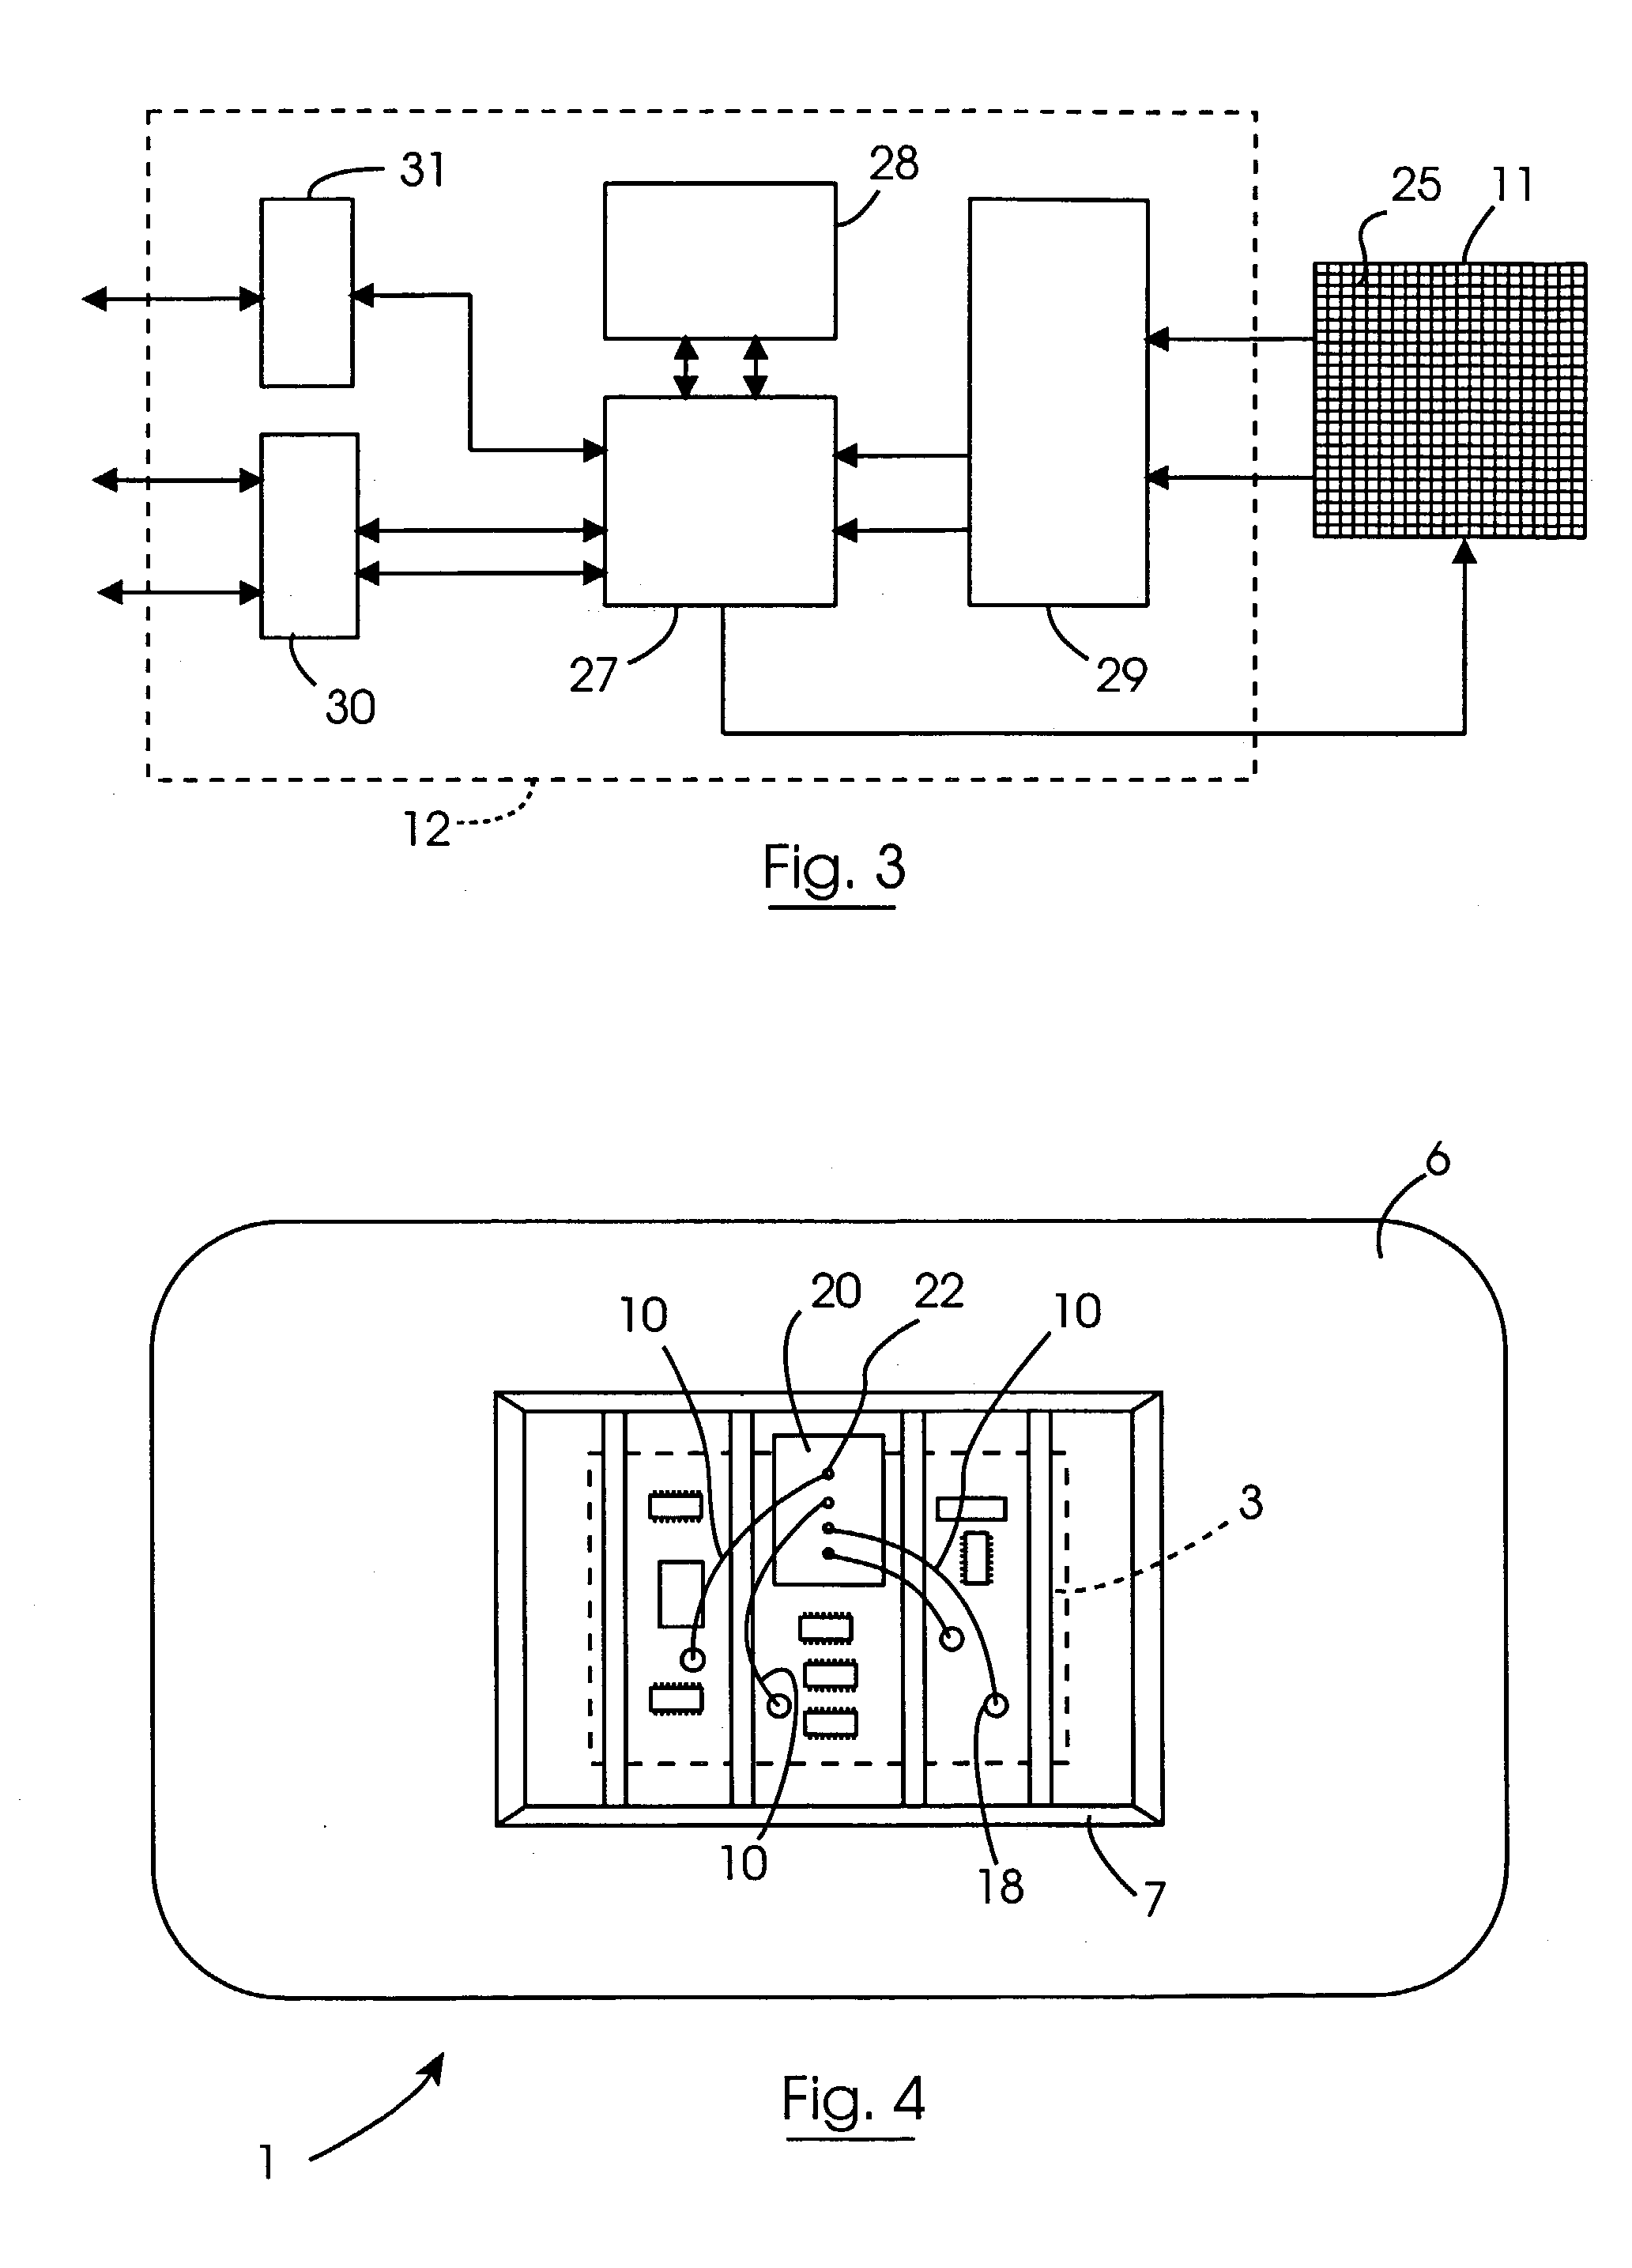 Apparatus for testing a light emitting device, and a method for testing light emitting devices